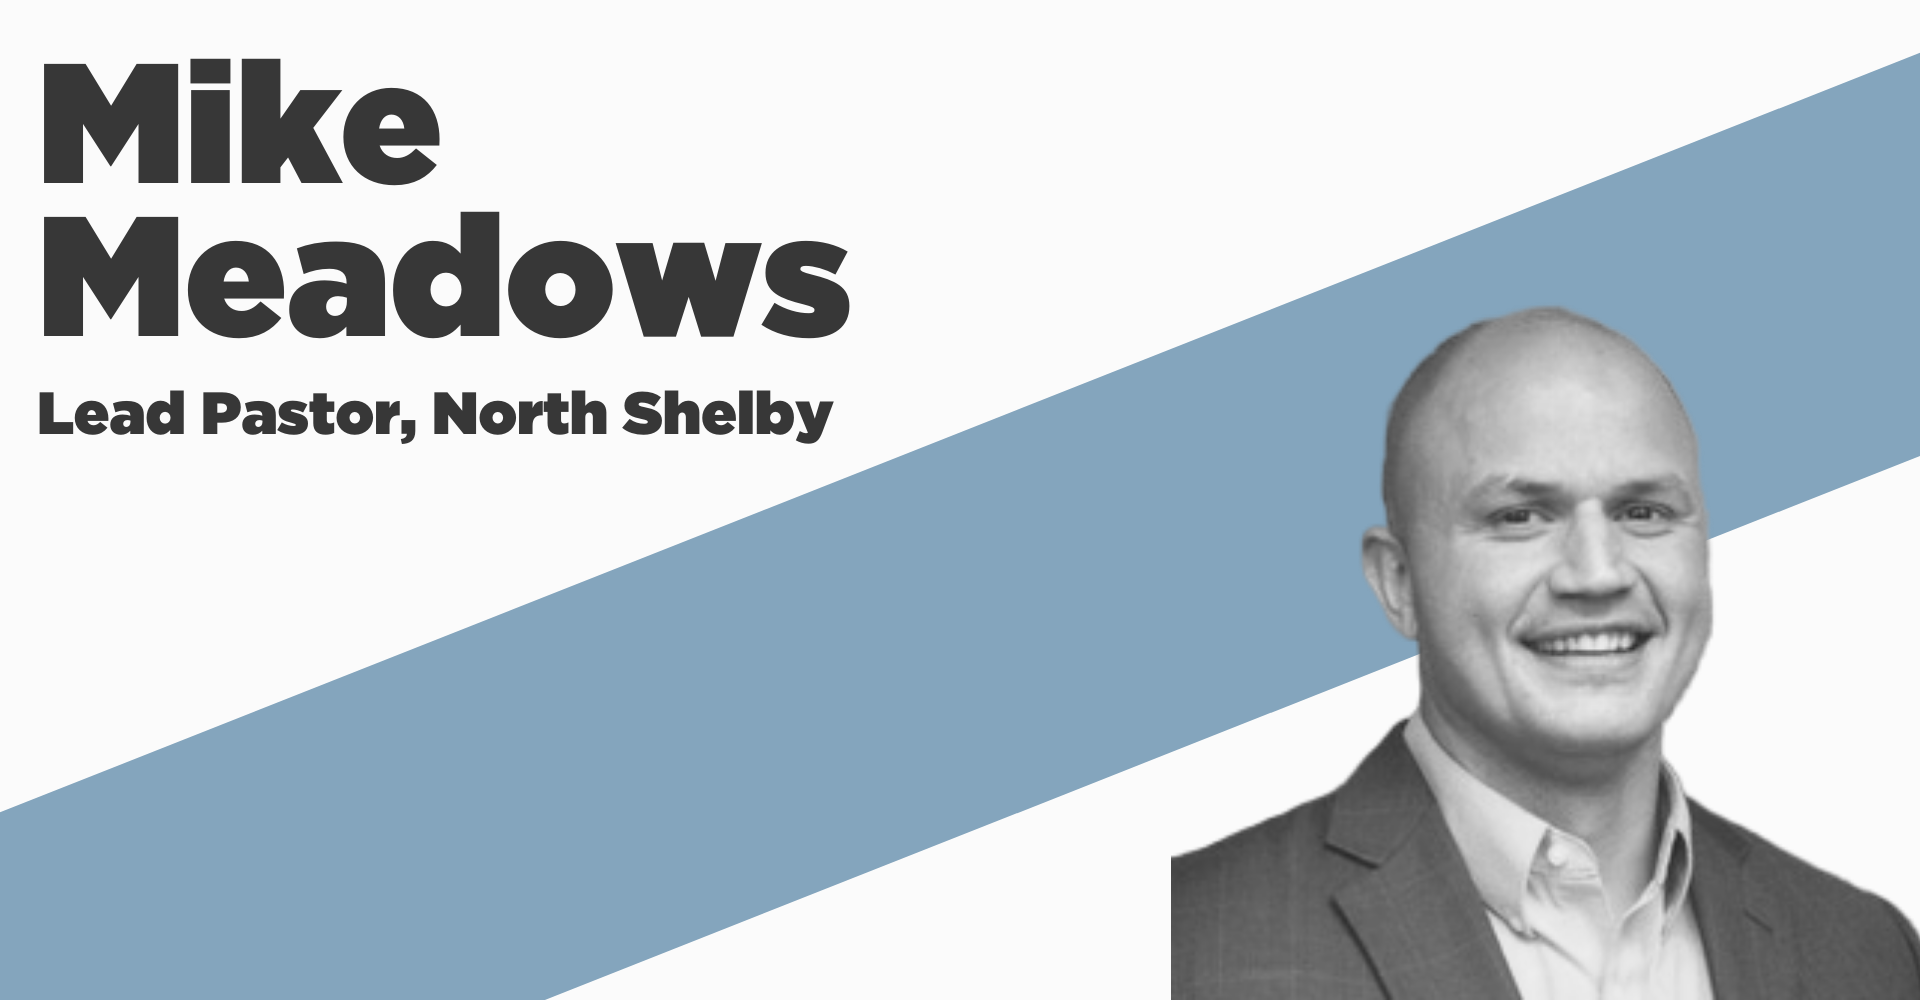 Mike Meadows - Lead Pastor, North Shelby